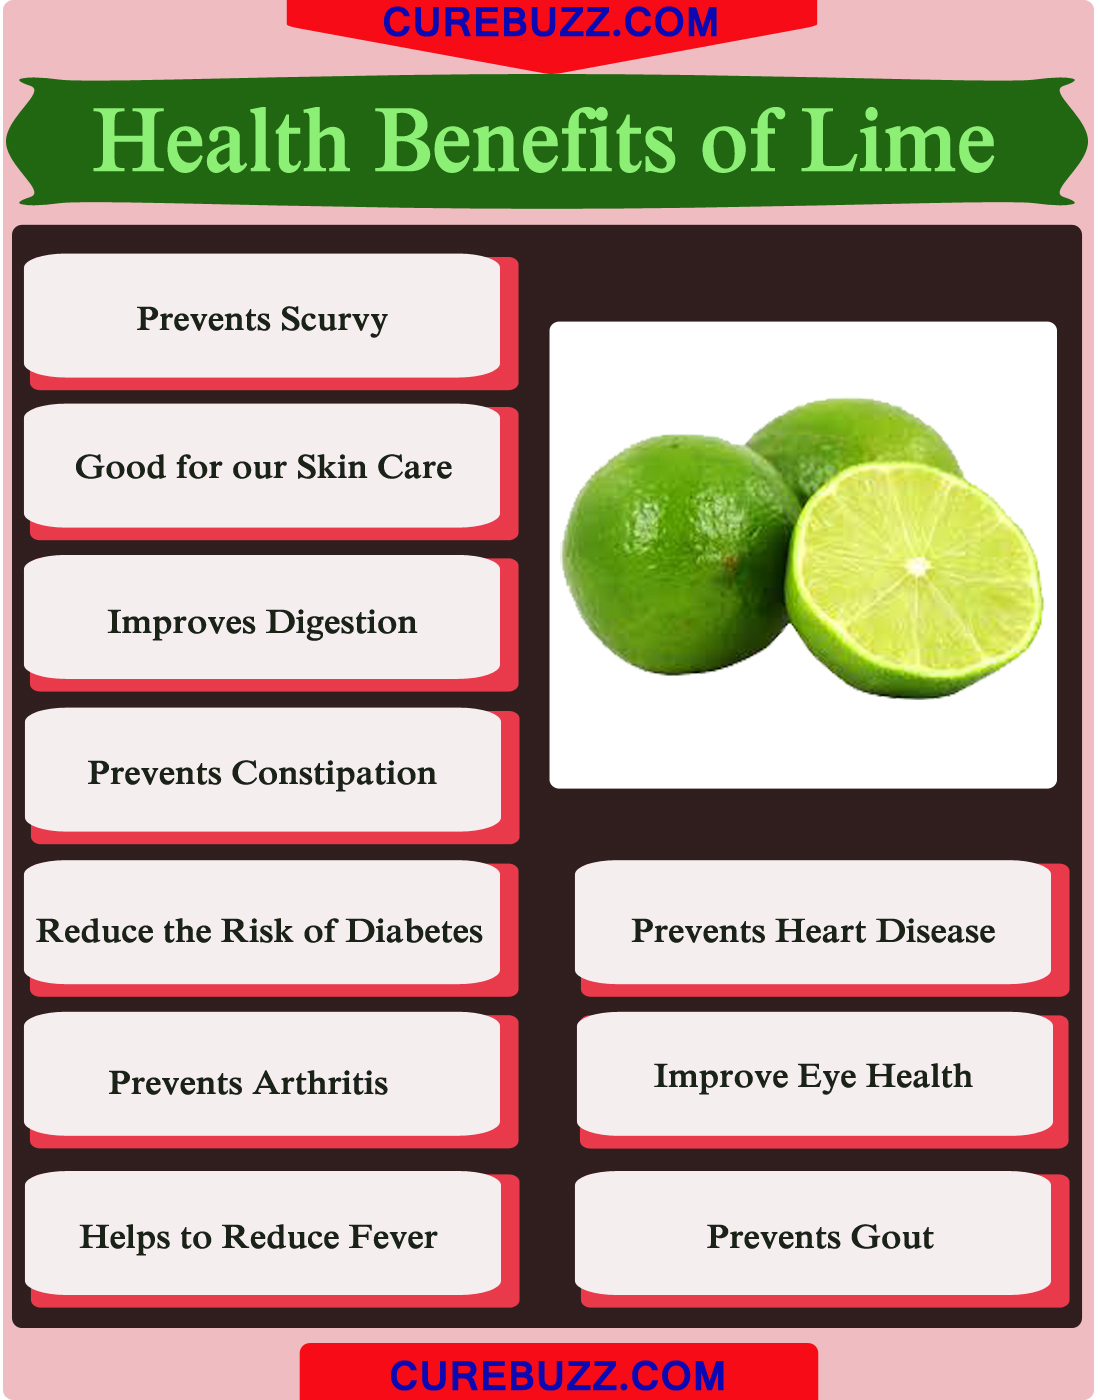 10 Health Benefits of Lime CUREBUZZ